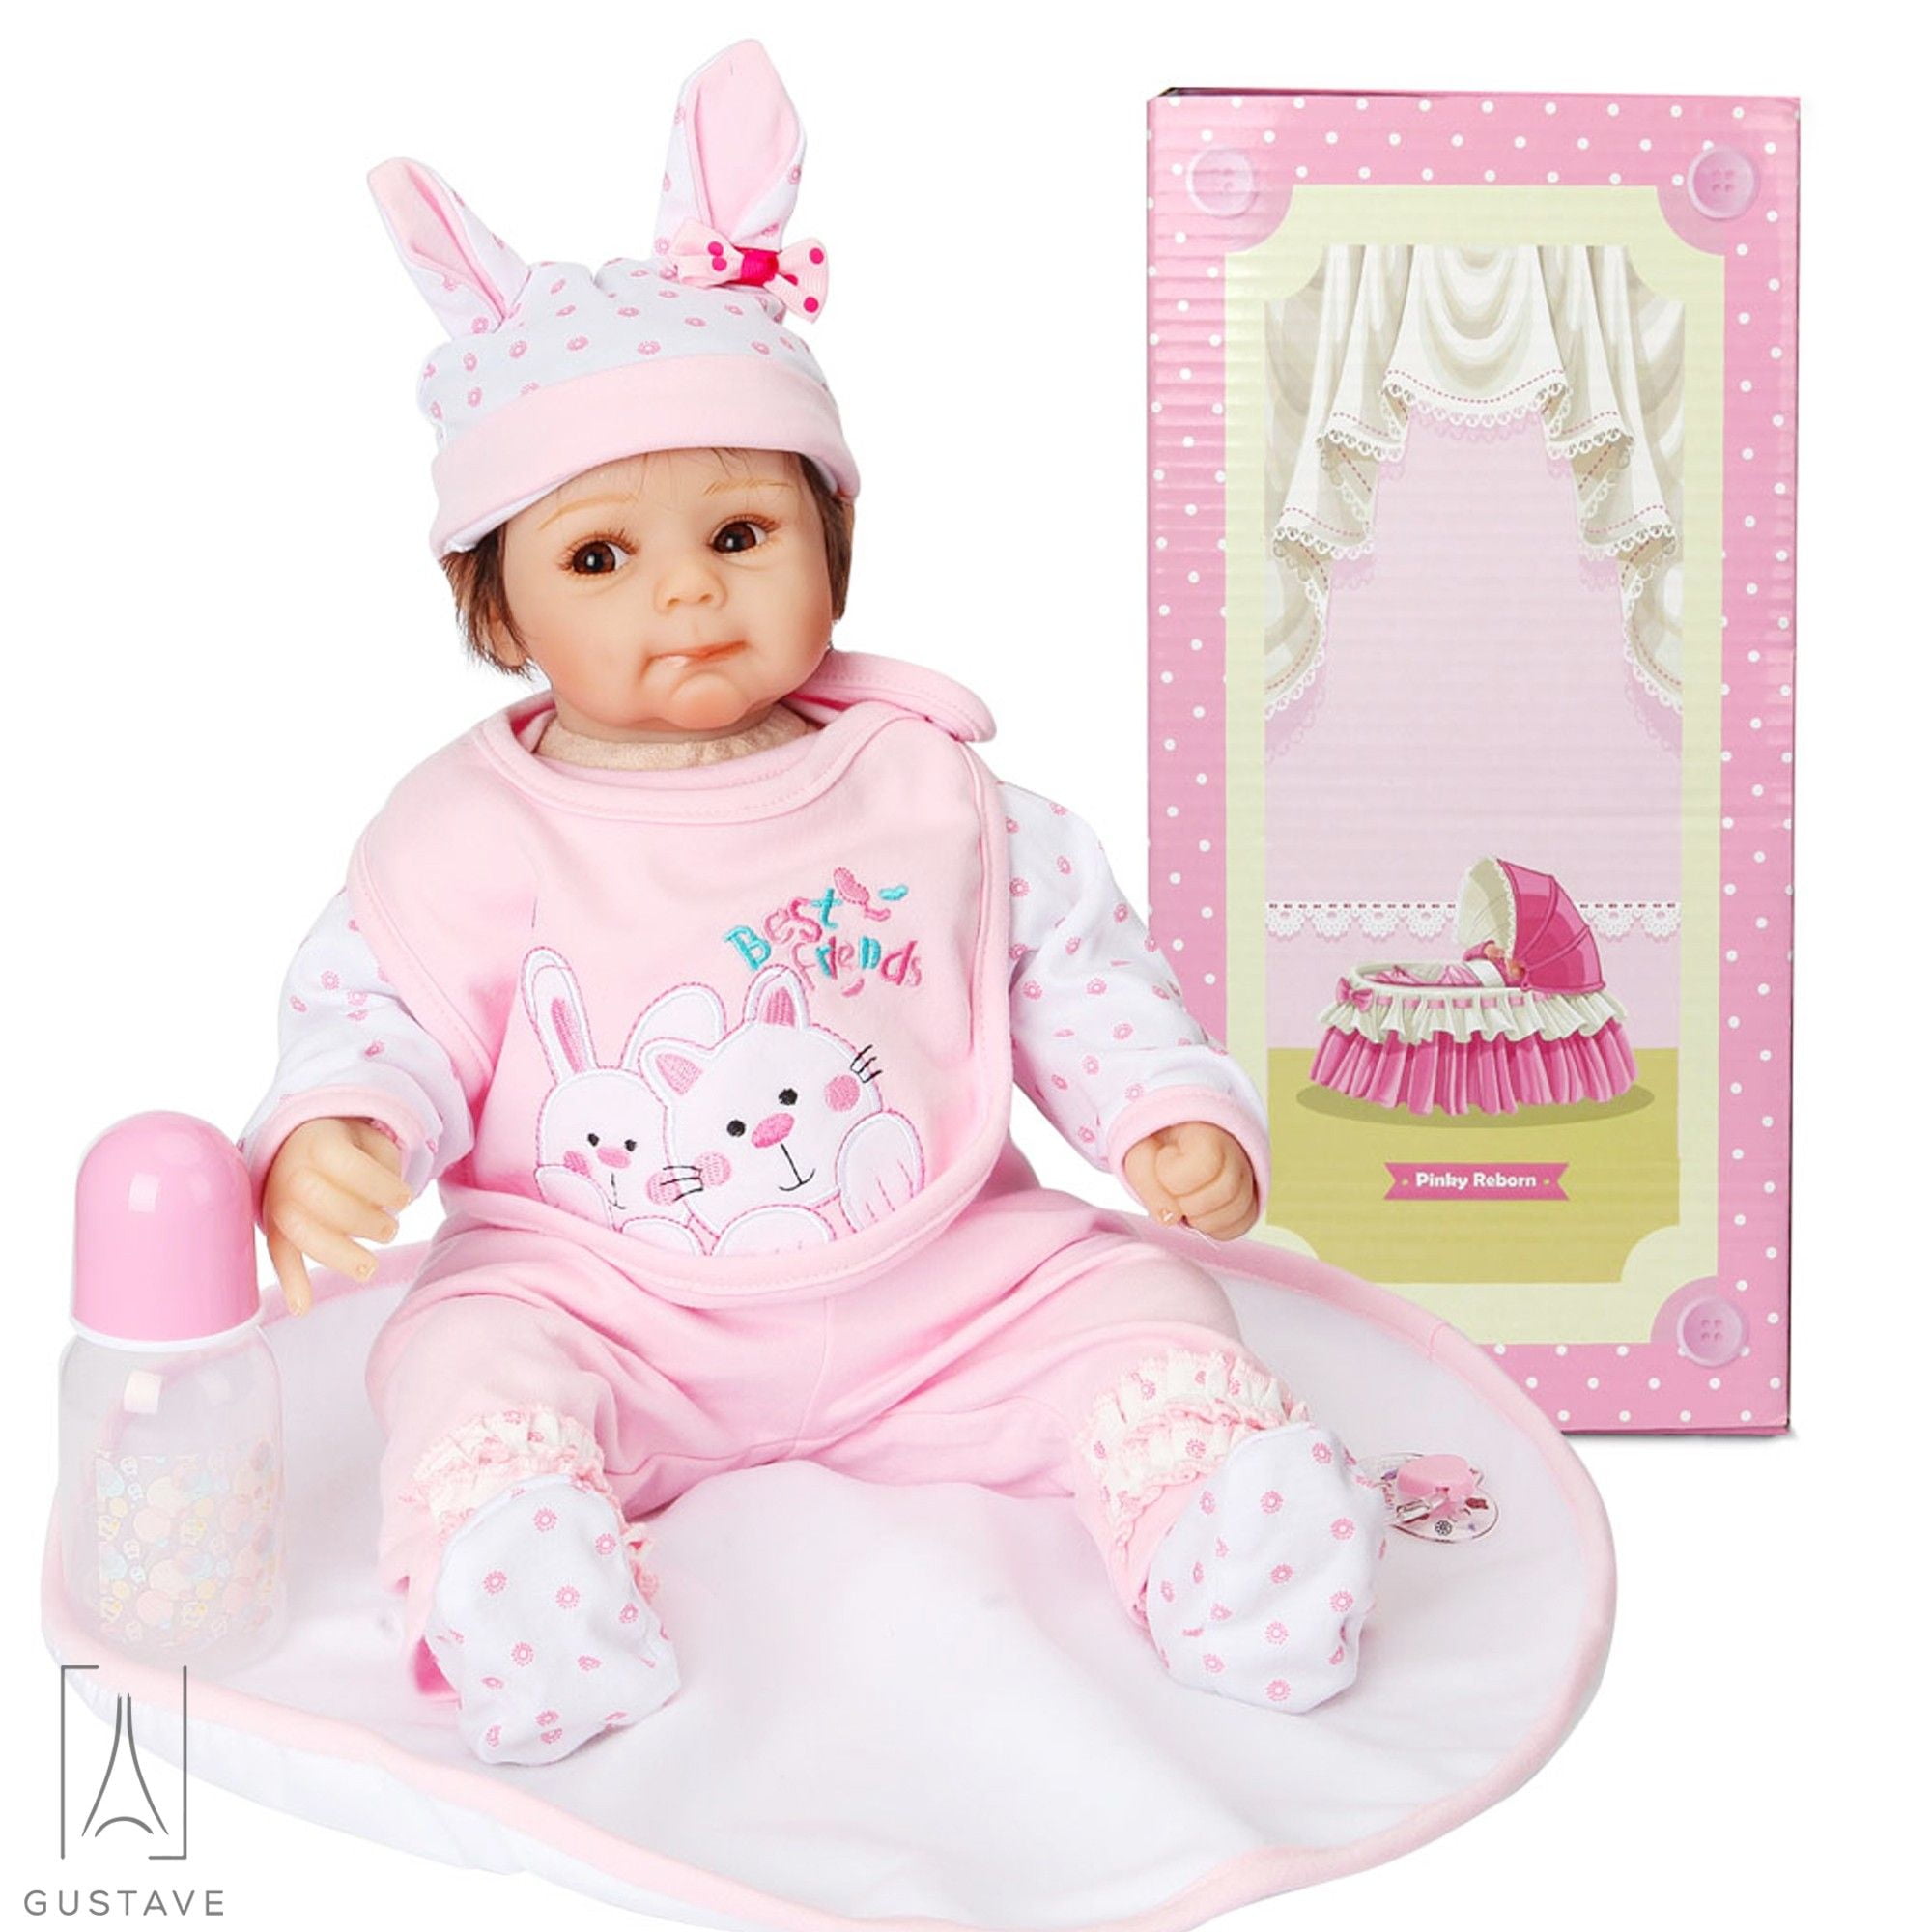 NEW! Weighted Reborn Lifelike Baby Dolls (3kg)